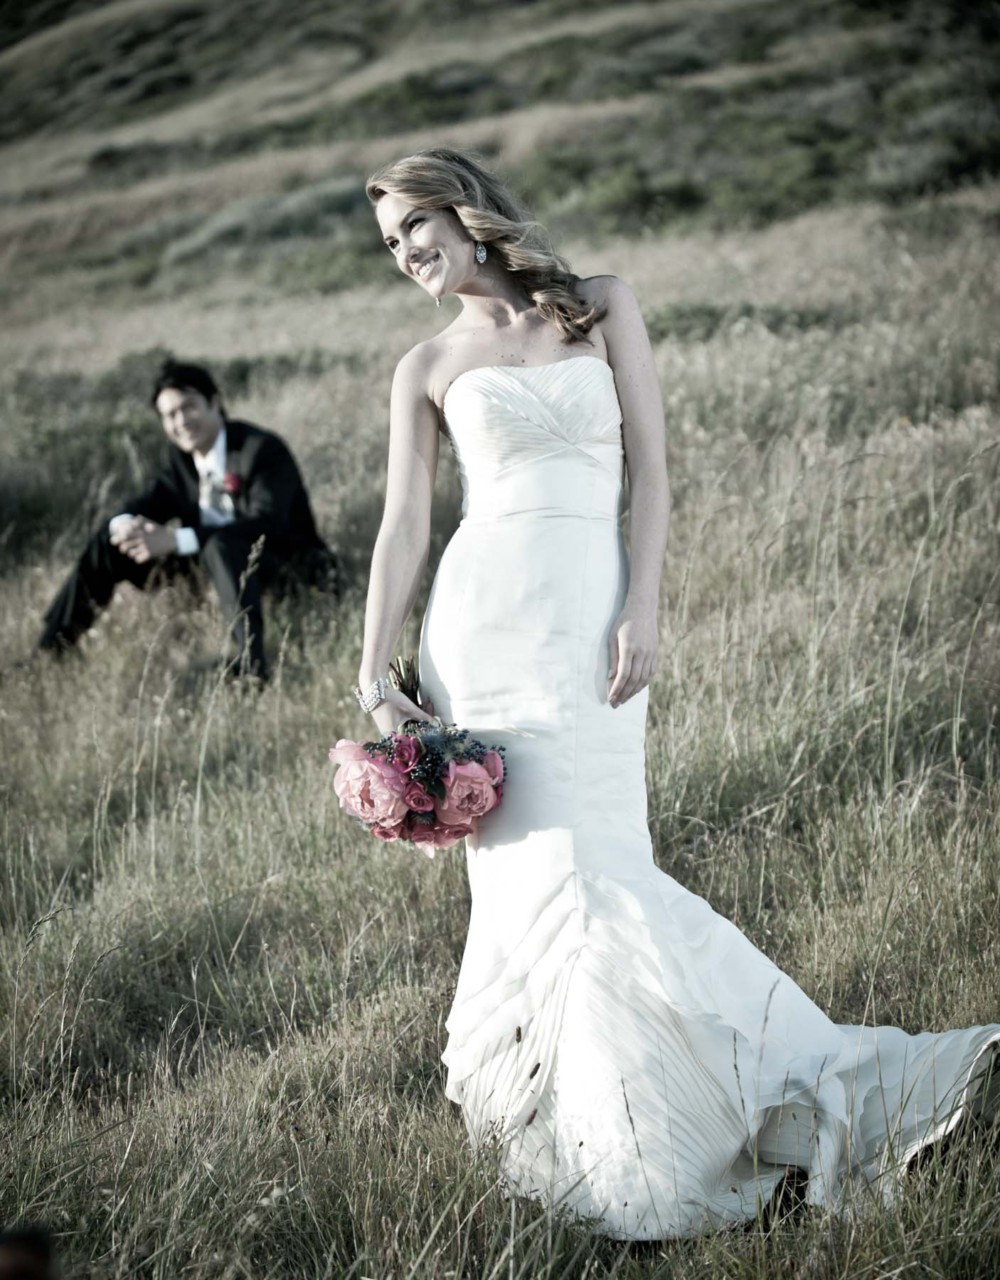 Looking for a destination wedding photographer in Chugiak?